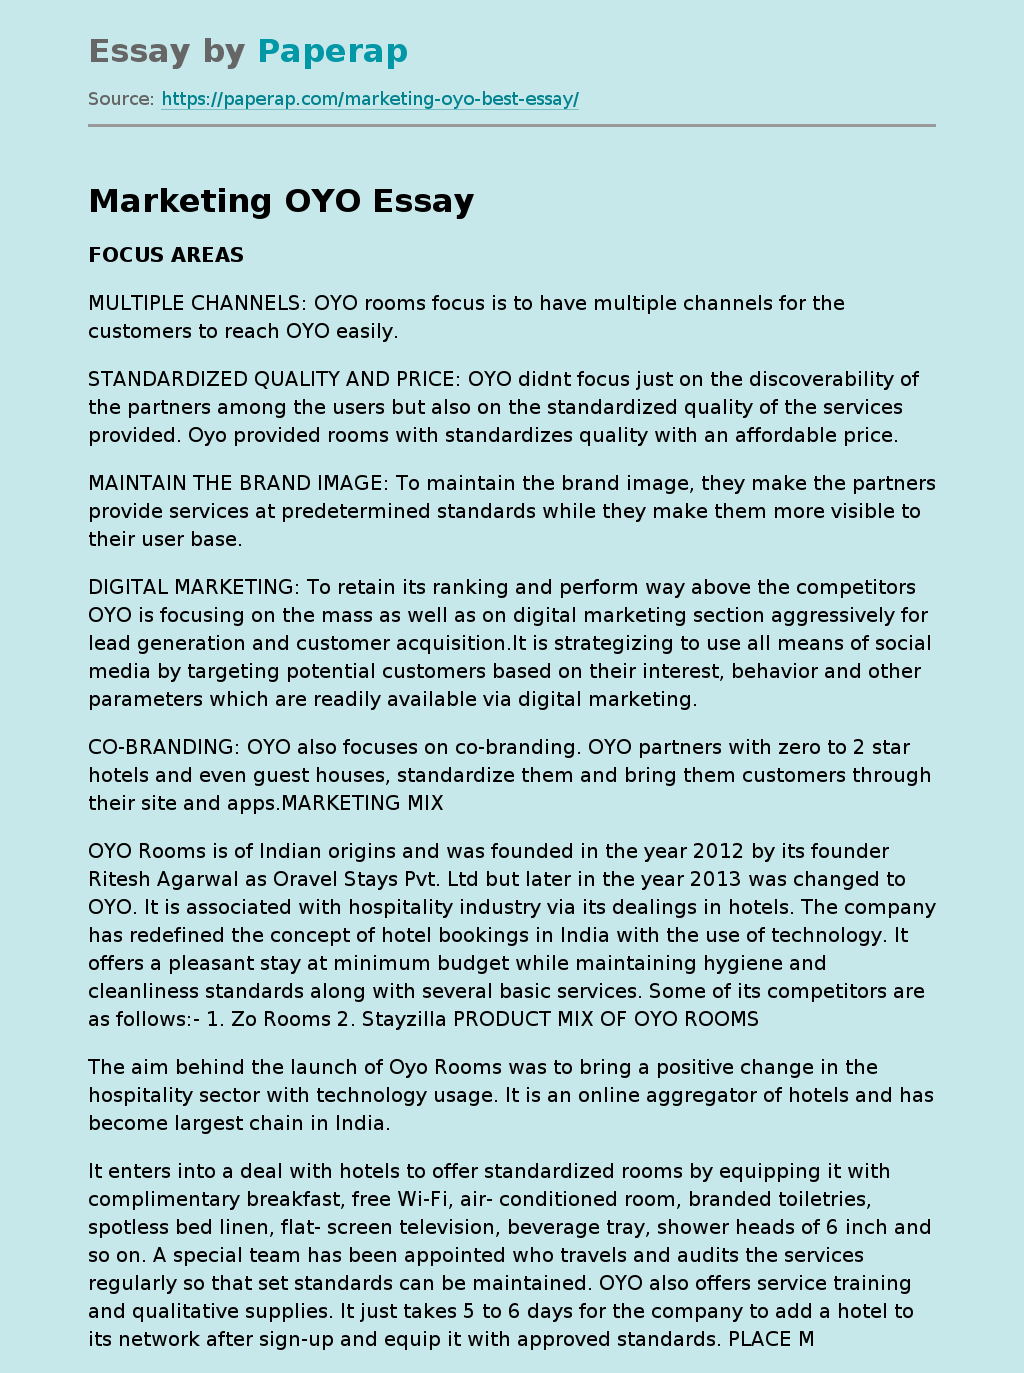 OYO's Focus on Multiple Channels and Quality Pricing